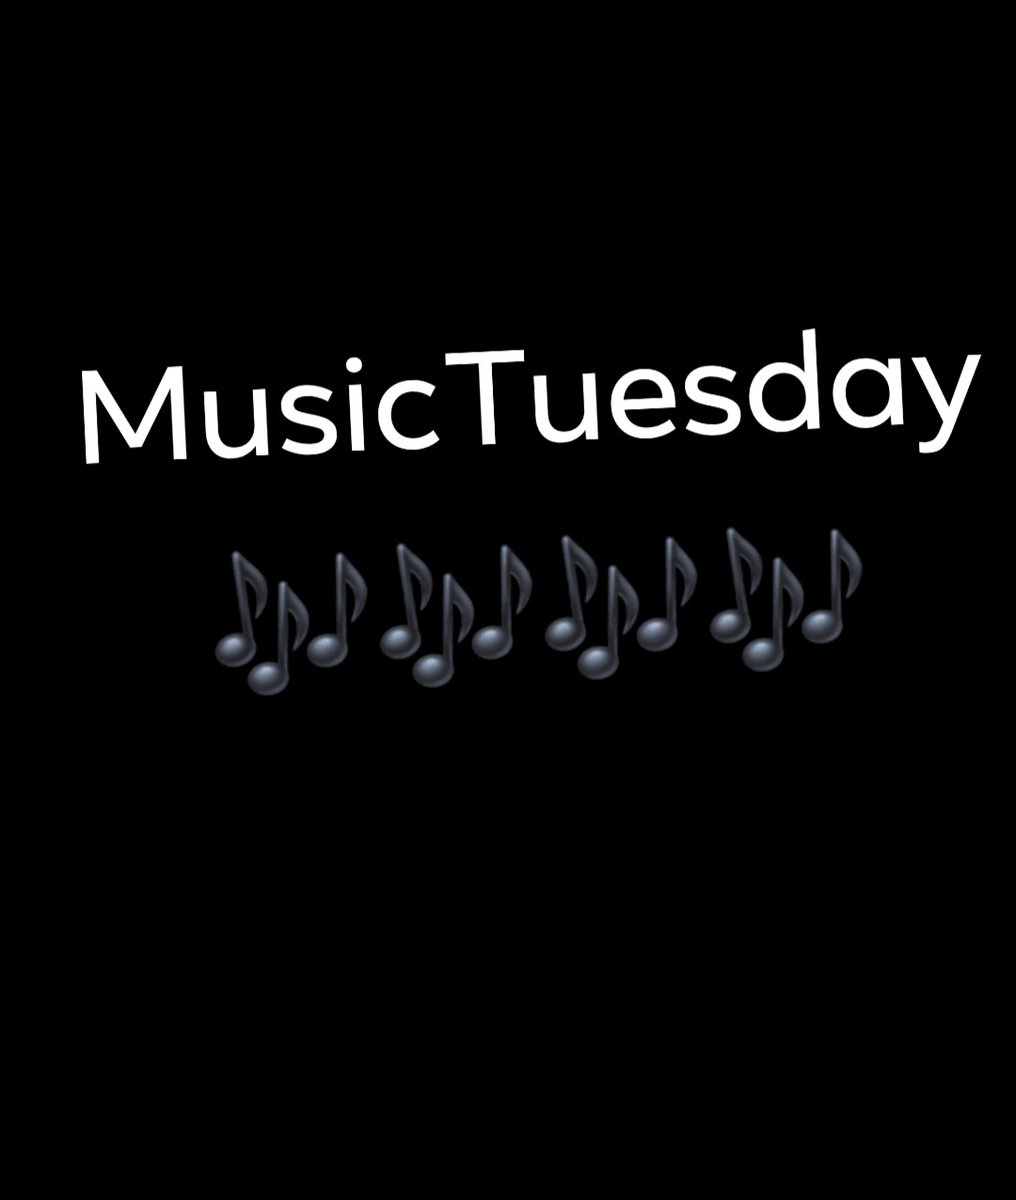 #MusicTuesday